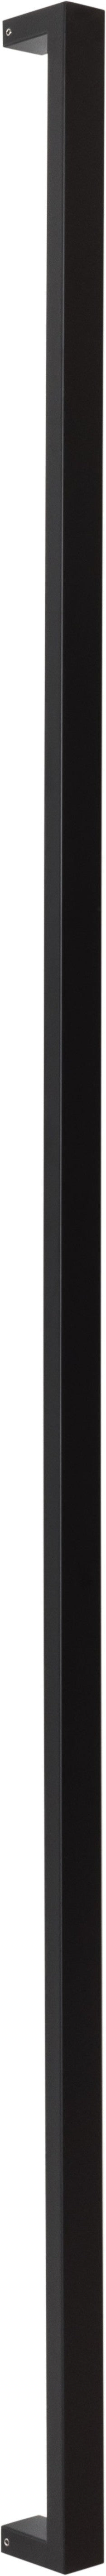 Sure-Loc 72" Square Long Door Pull, Single-Sided in Flat Black finish